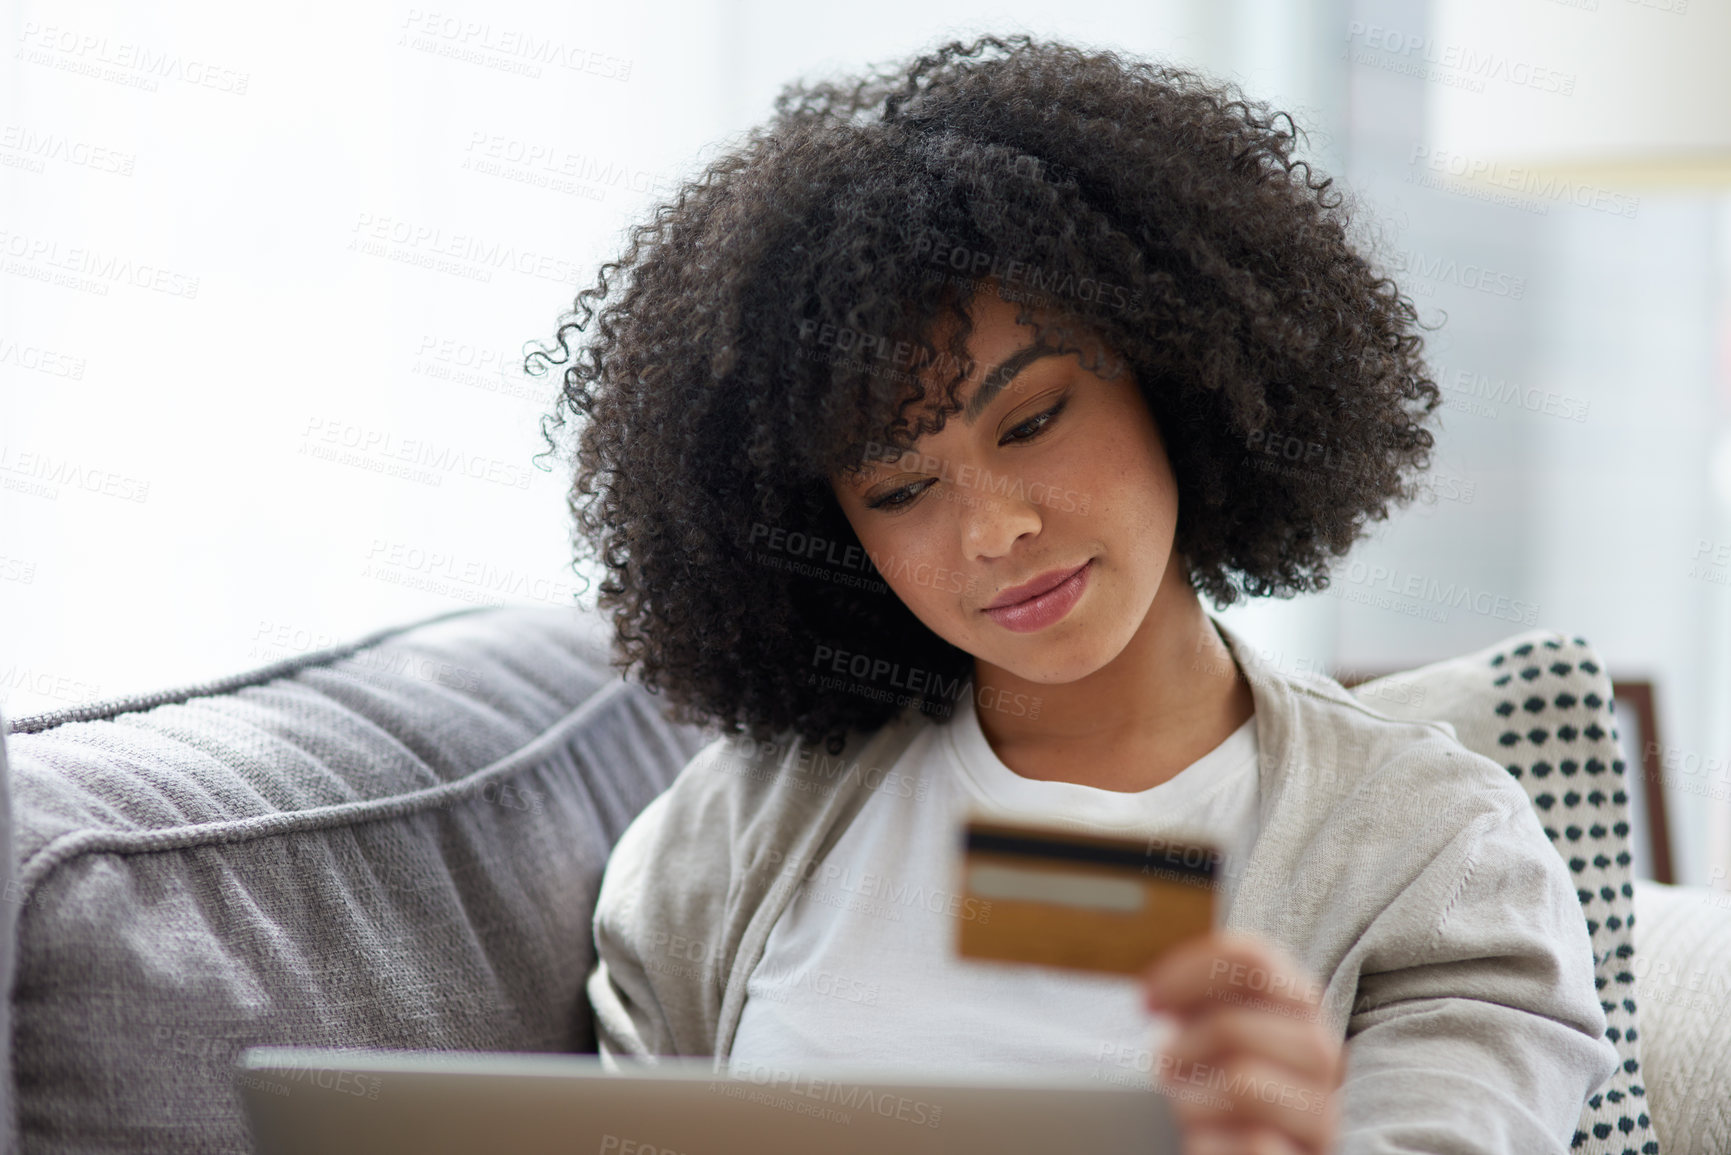 Buy stock photo Shot of a young woman using a laptop and credit card at home